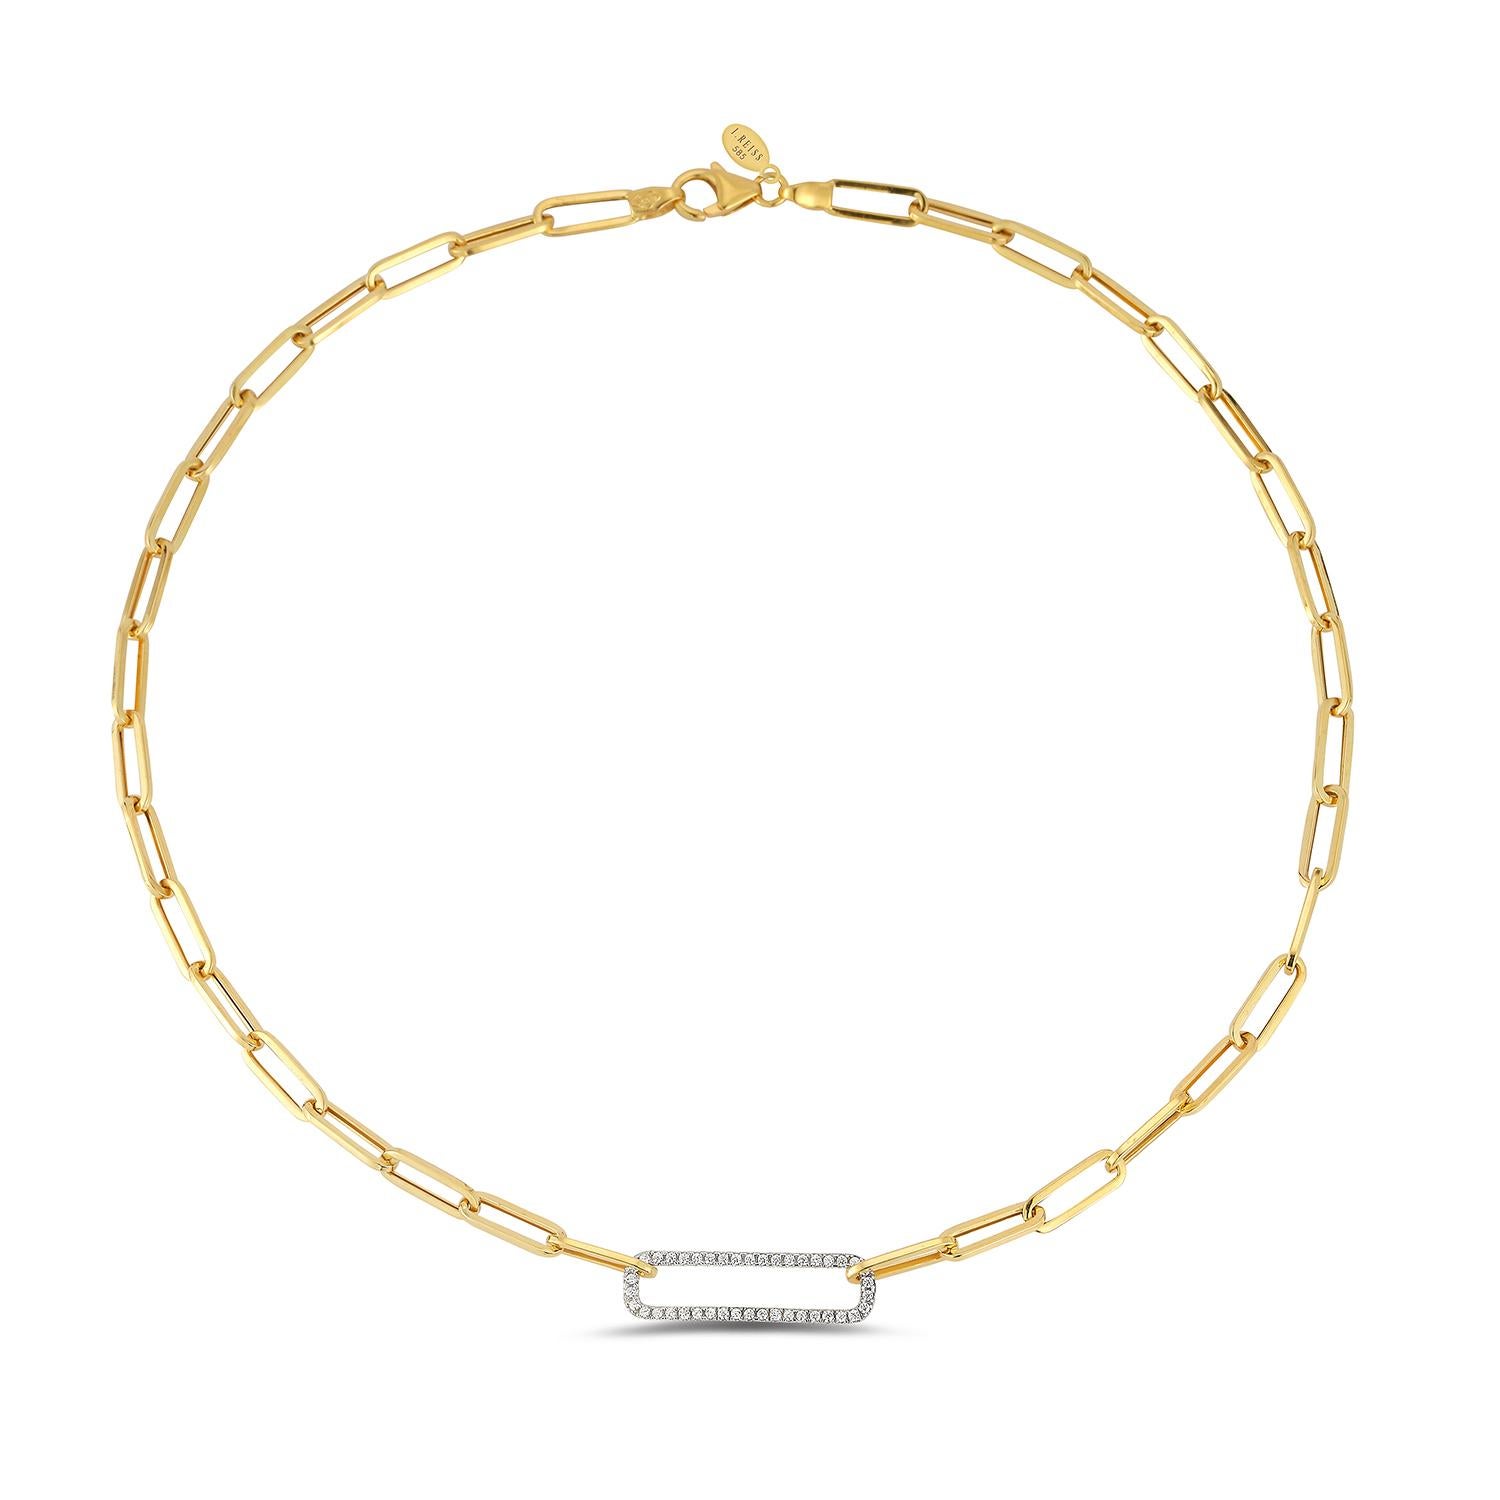 14 Karat Yellow Gold Hand-Crafted Polish-Finished Open Link Necklace, Set with 0.25 Carat Diamonds of an Open Rectangle Motif.
